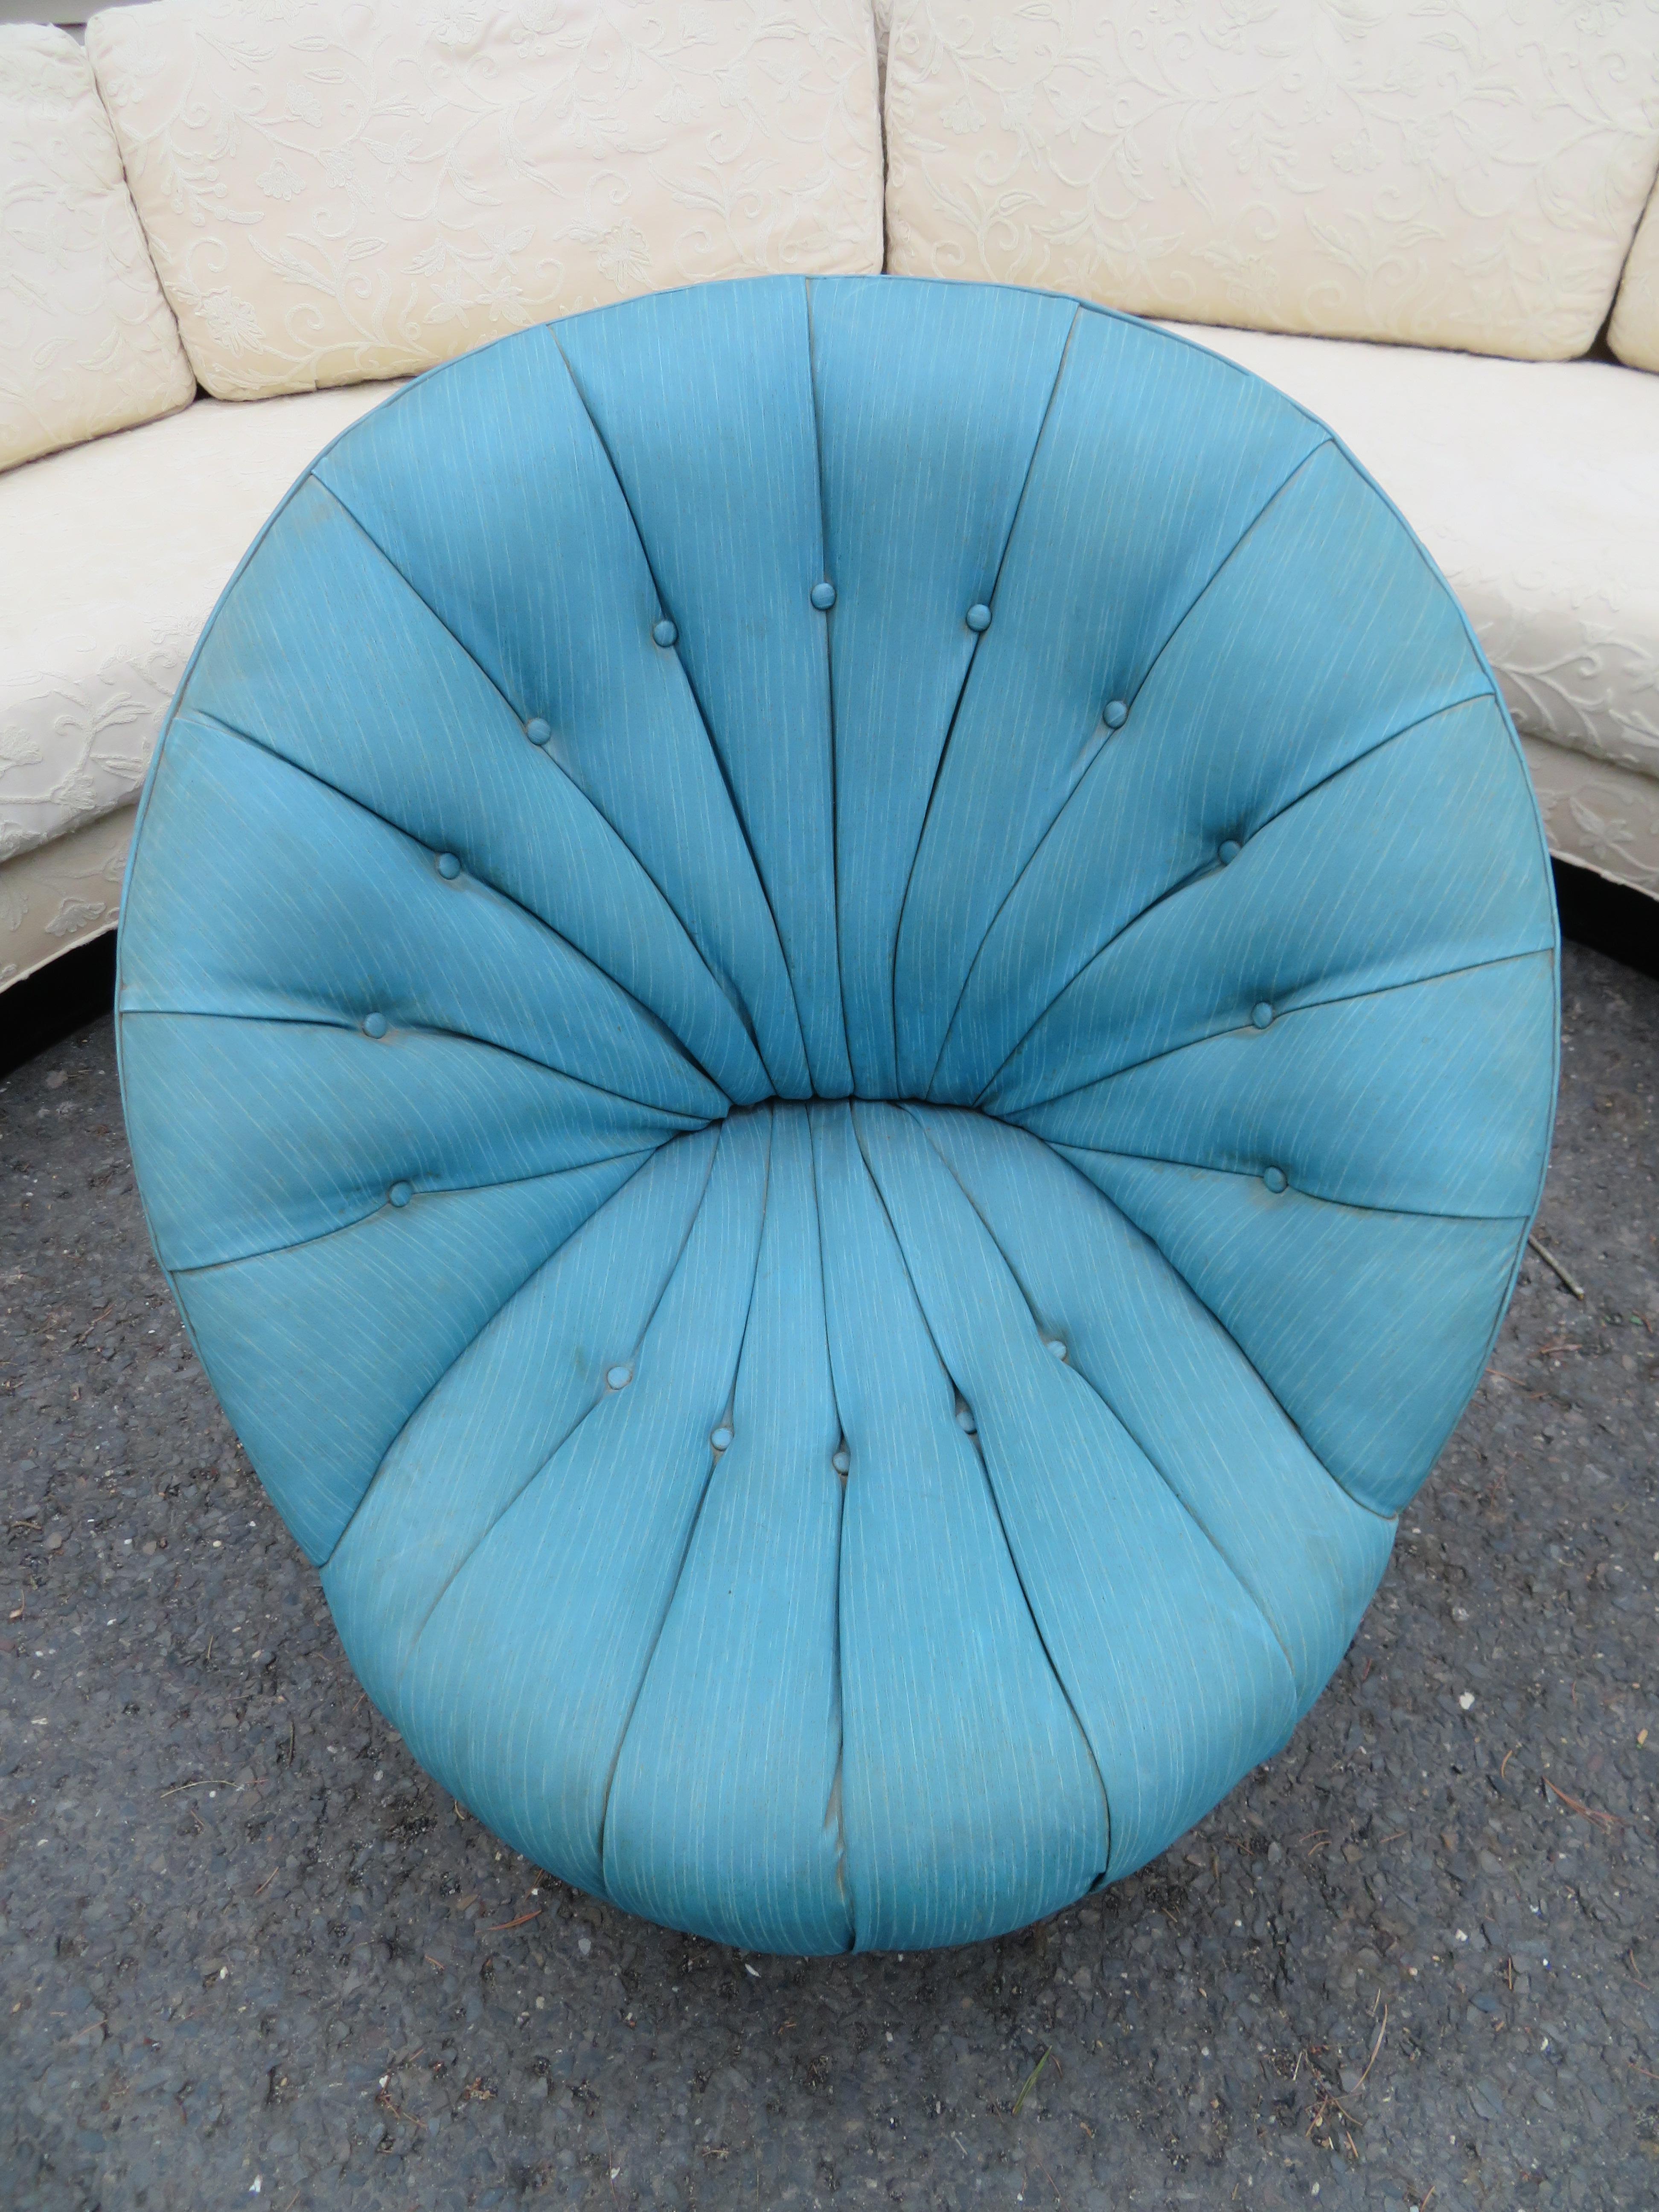 Delightful Dorothy Draper Style Channel Tufted Circular Chair Hollywood Regency In Good Condition For Sale In Pemberton, NJ